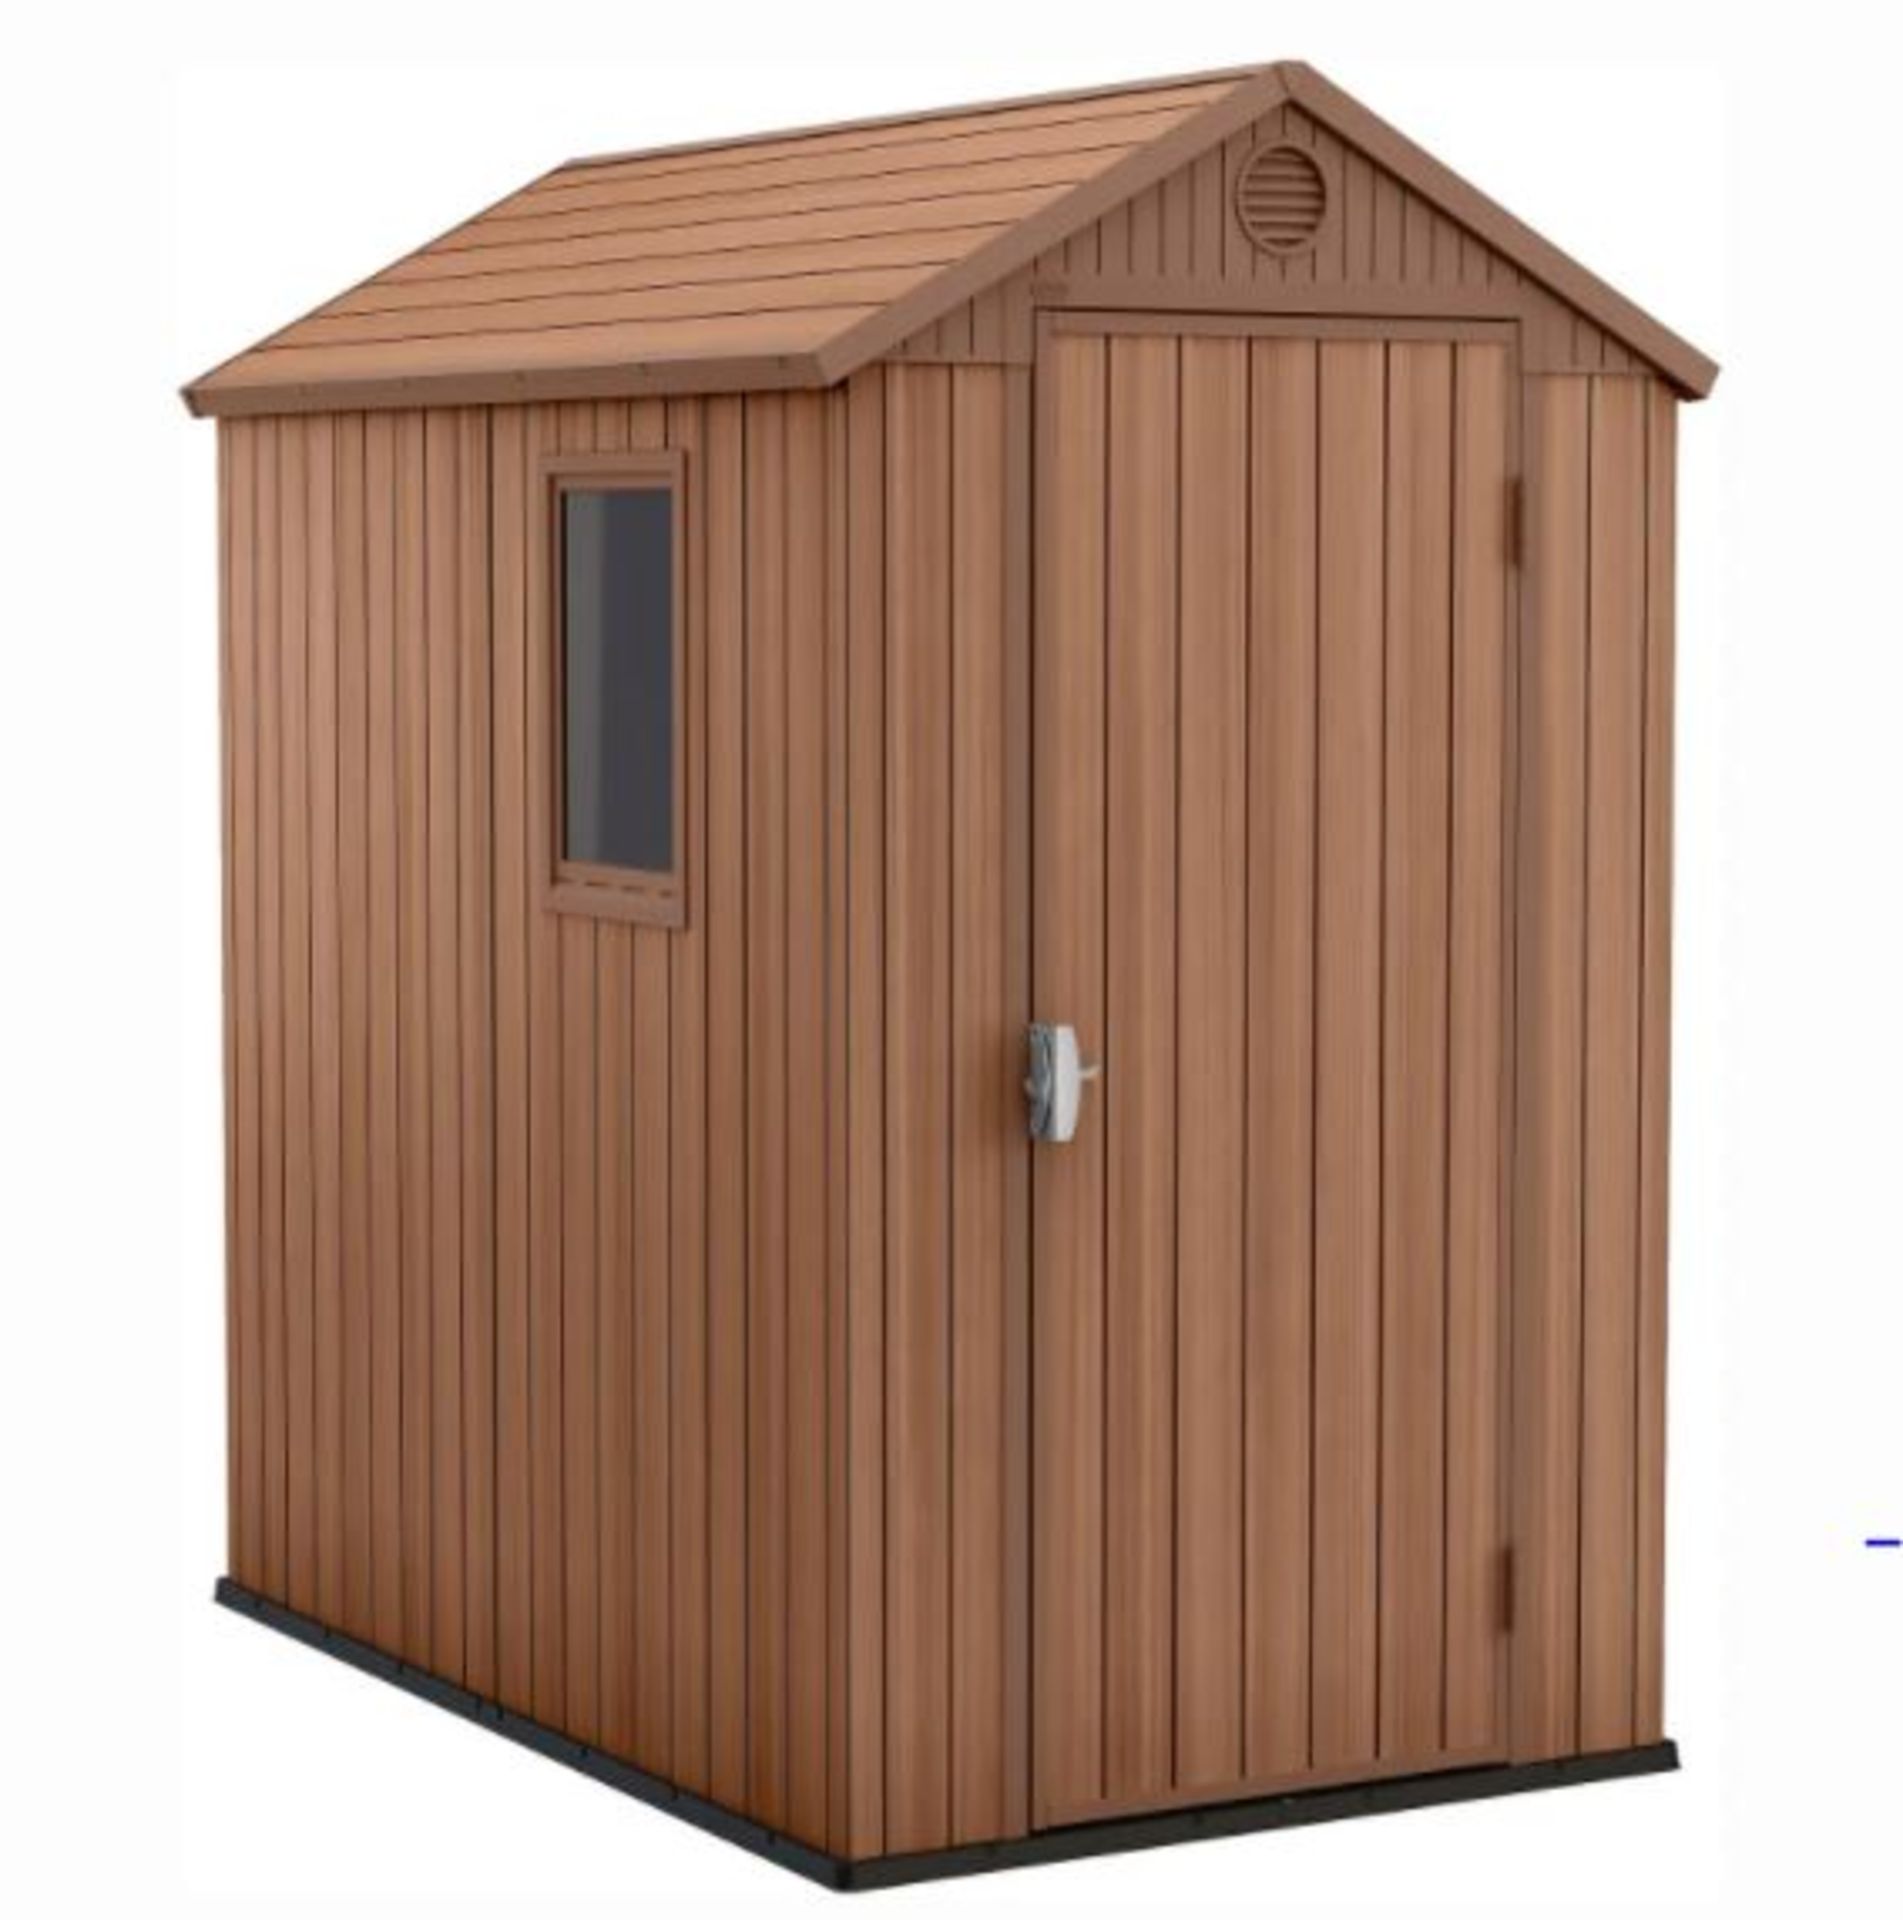 (R16) 1x Keter Darwin 4x6 Outdoor Plastic Garden Shed Brown RRP £340. Dimensions (H)205 x (W)125. - Image 3 of 8